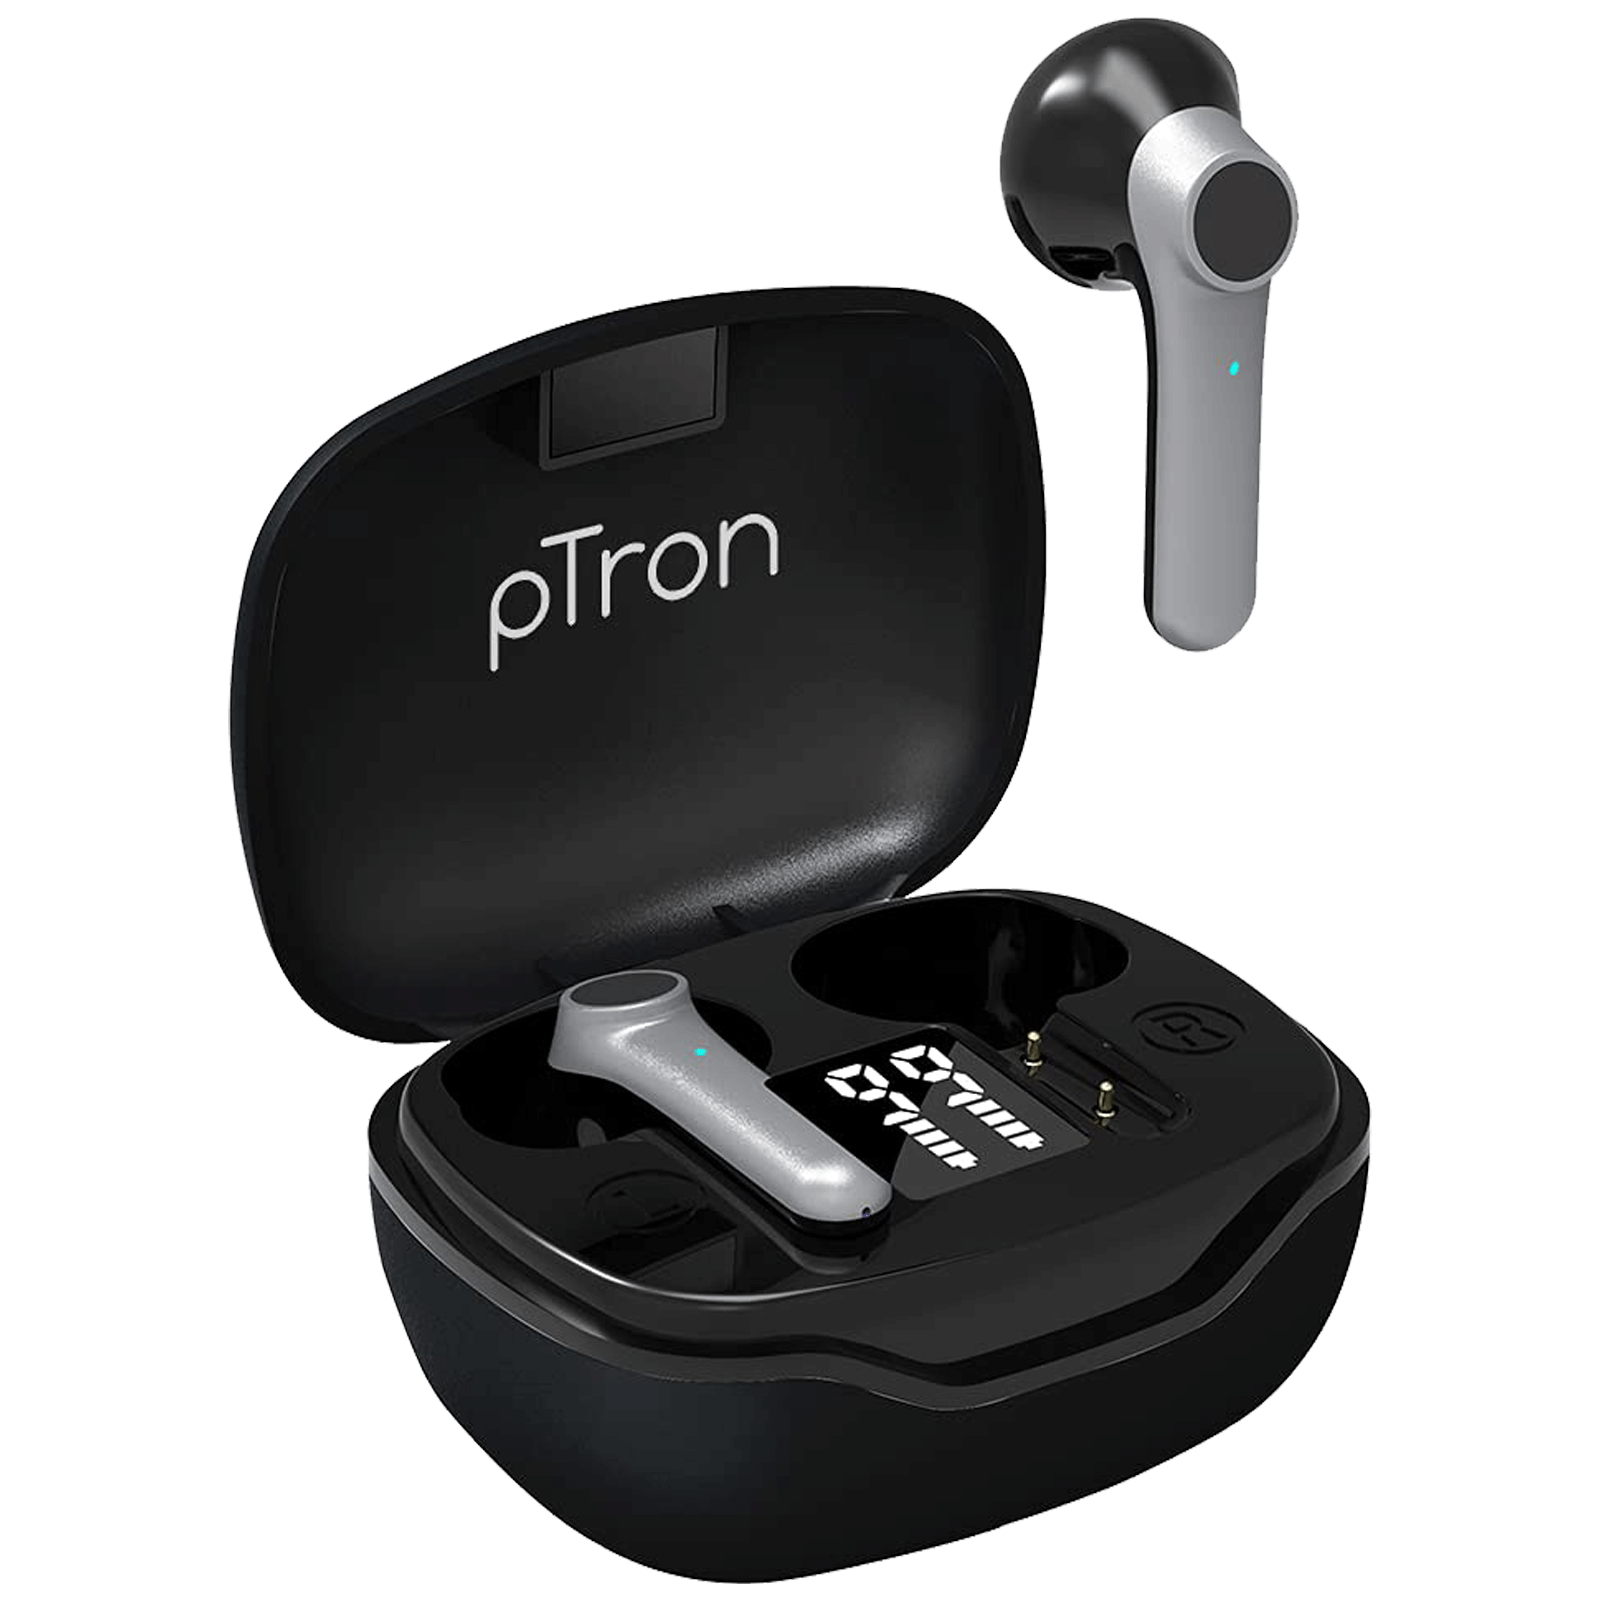 pTron Basspods 281 140317948 In-Ear Passive Noise Cancellation Truly Wireless Earbuds with Mic (Bluetooth 5.1, Water and Sweat Resistance, Black/Grey)_1